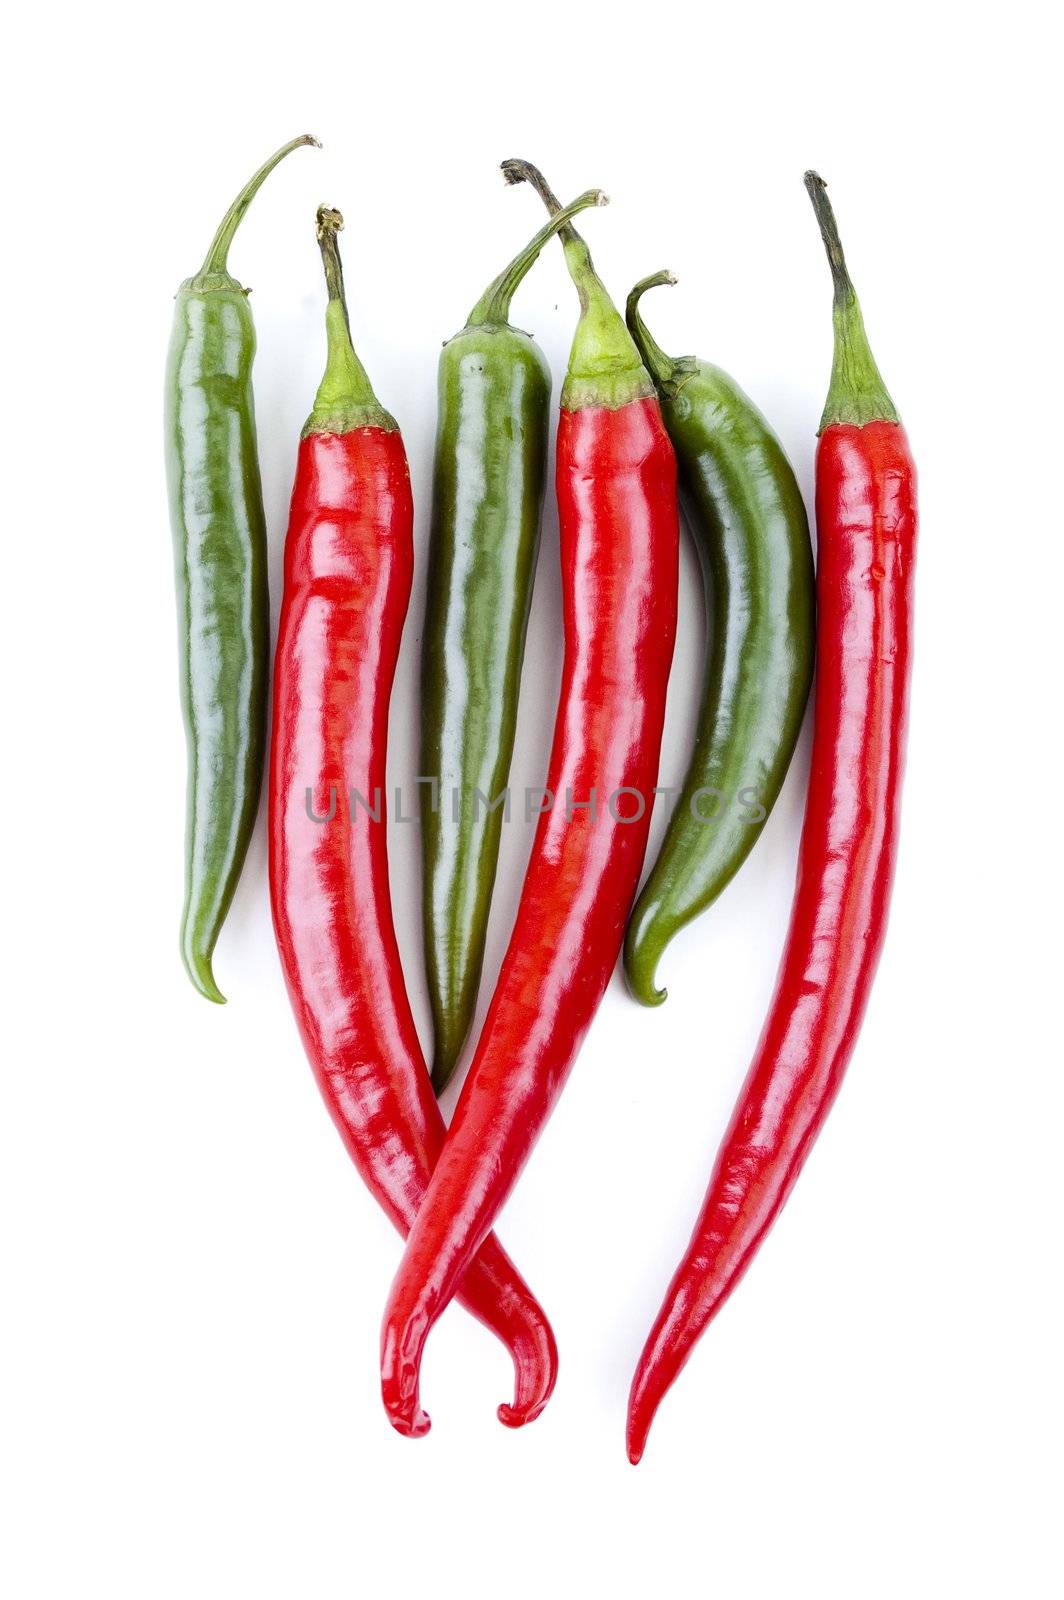 a vertical series of green and red chili peppers